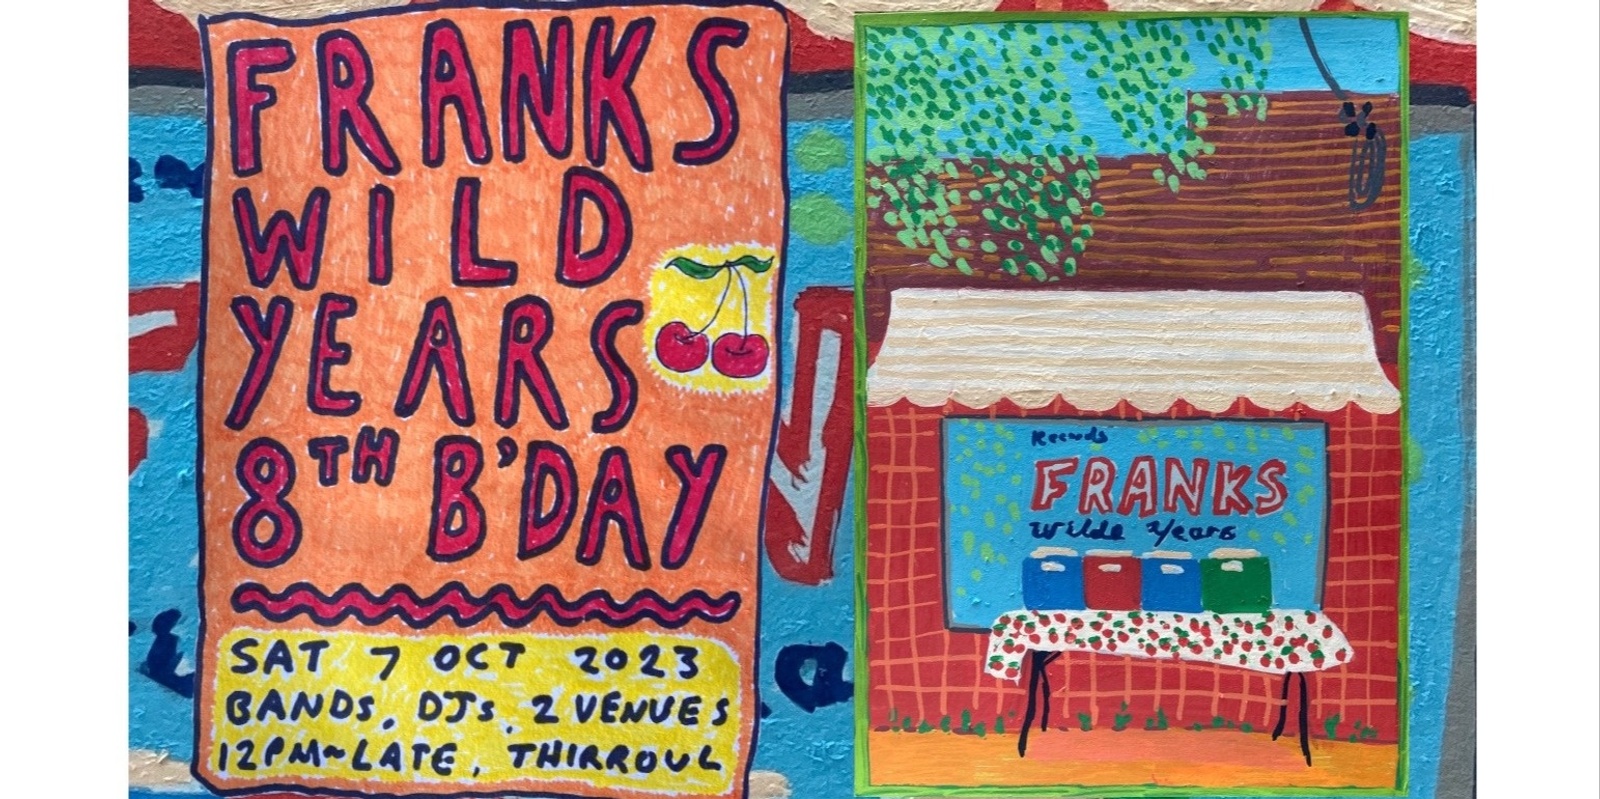 Banner image for Franks Wild Years 8th Birthday